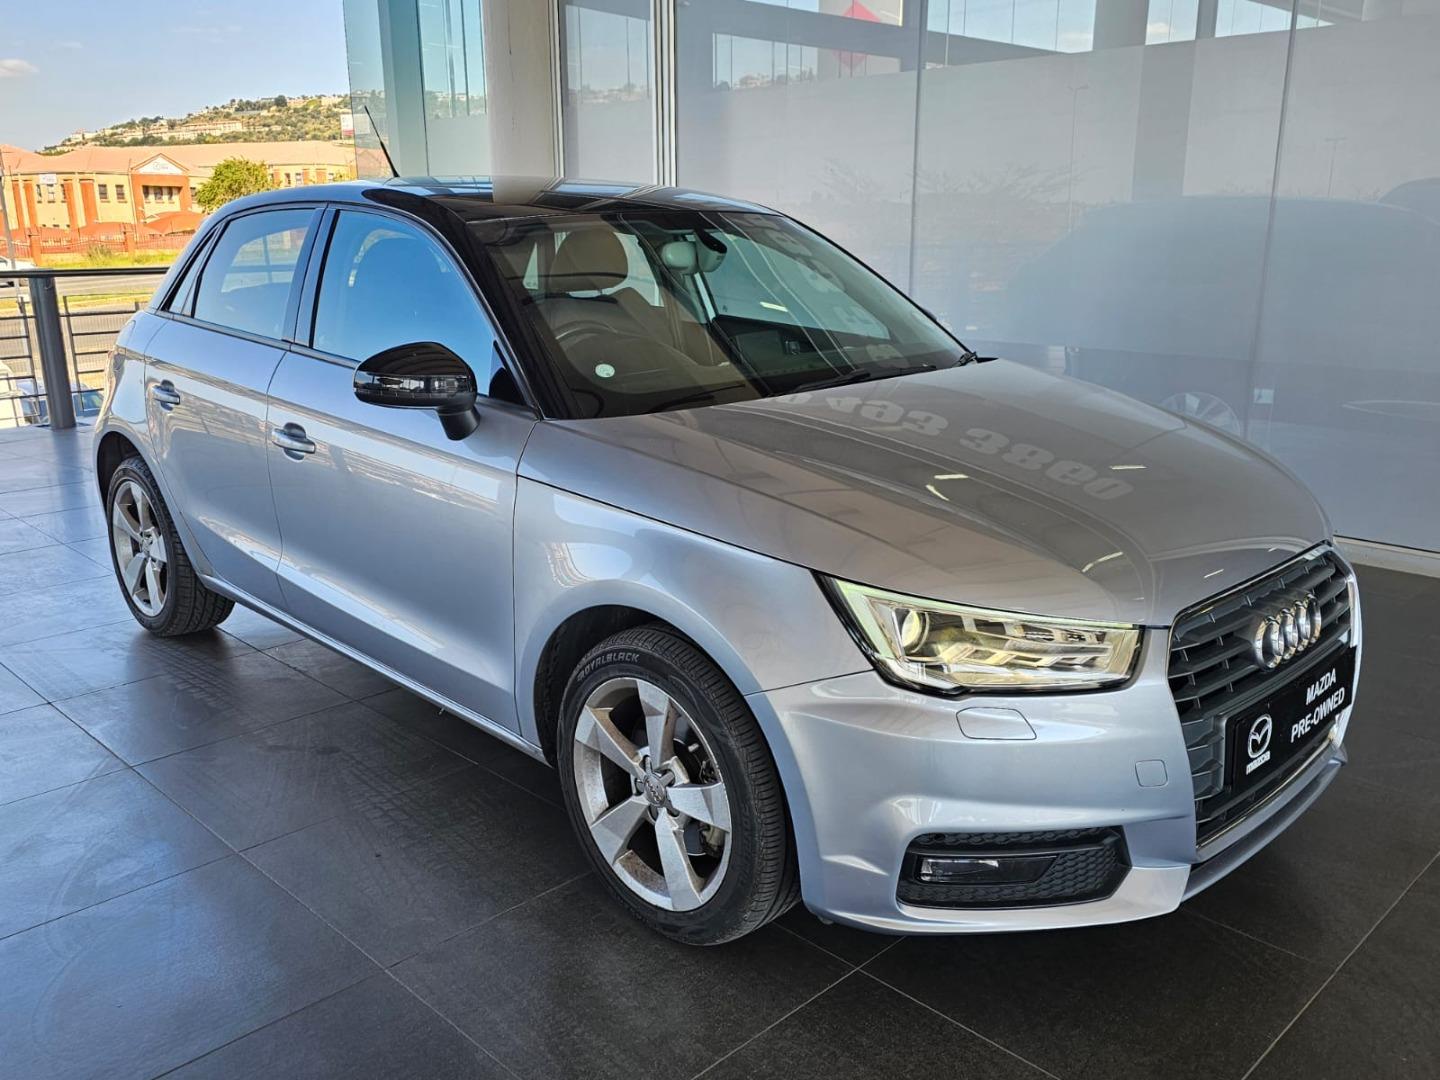 2016 Audi A1  for sale - UC4478